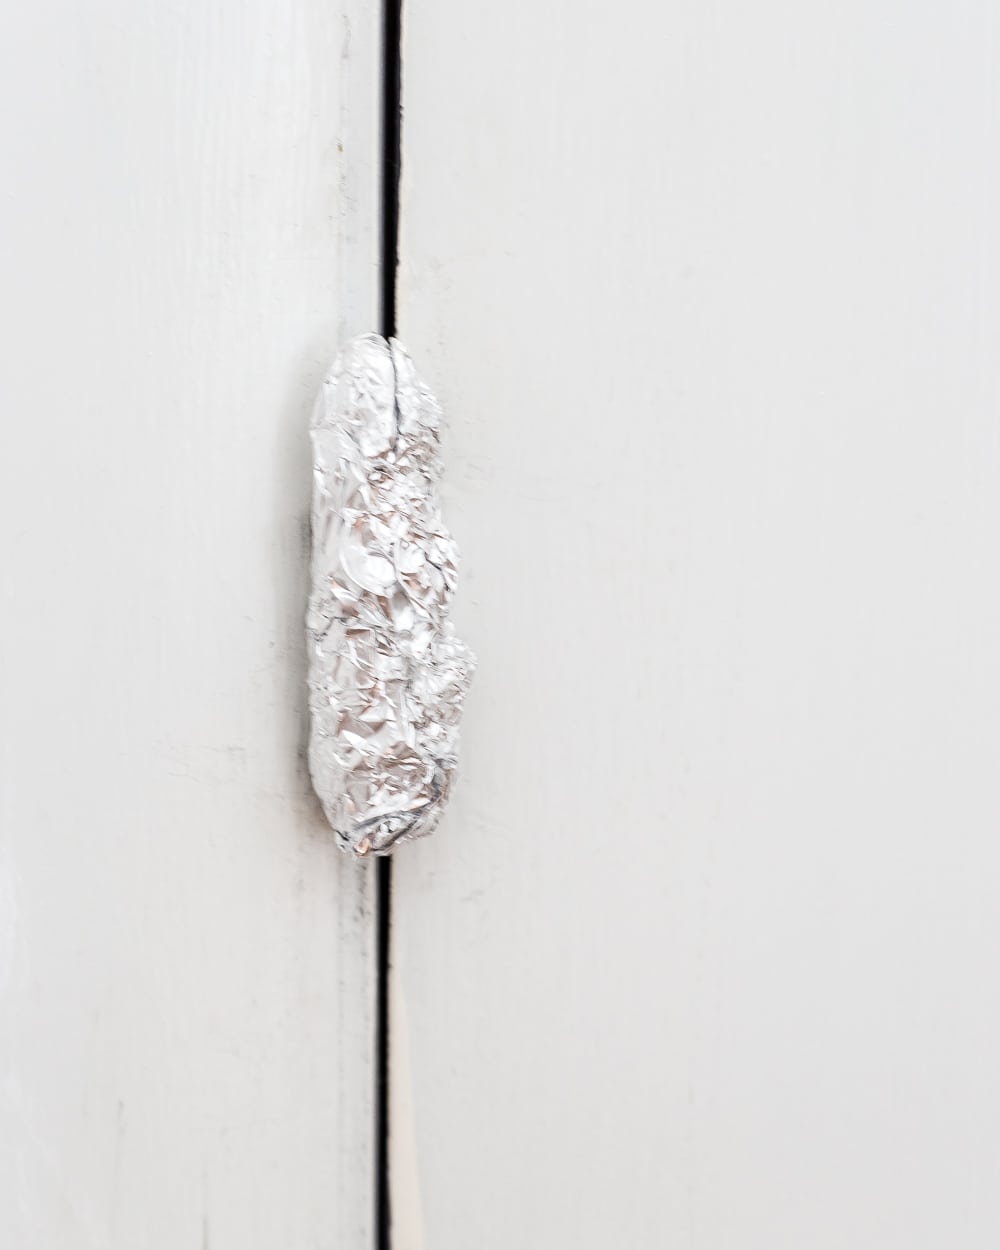 Tip: Use aluminum foil on hinges and doorknobs before painting doors